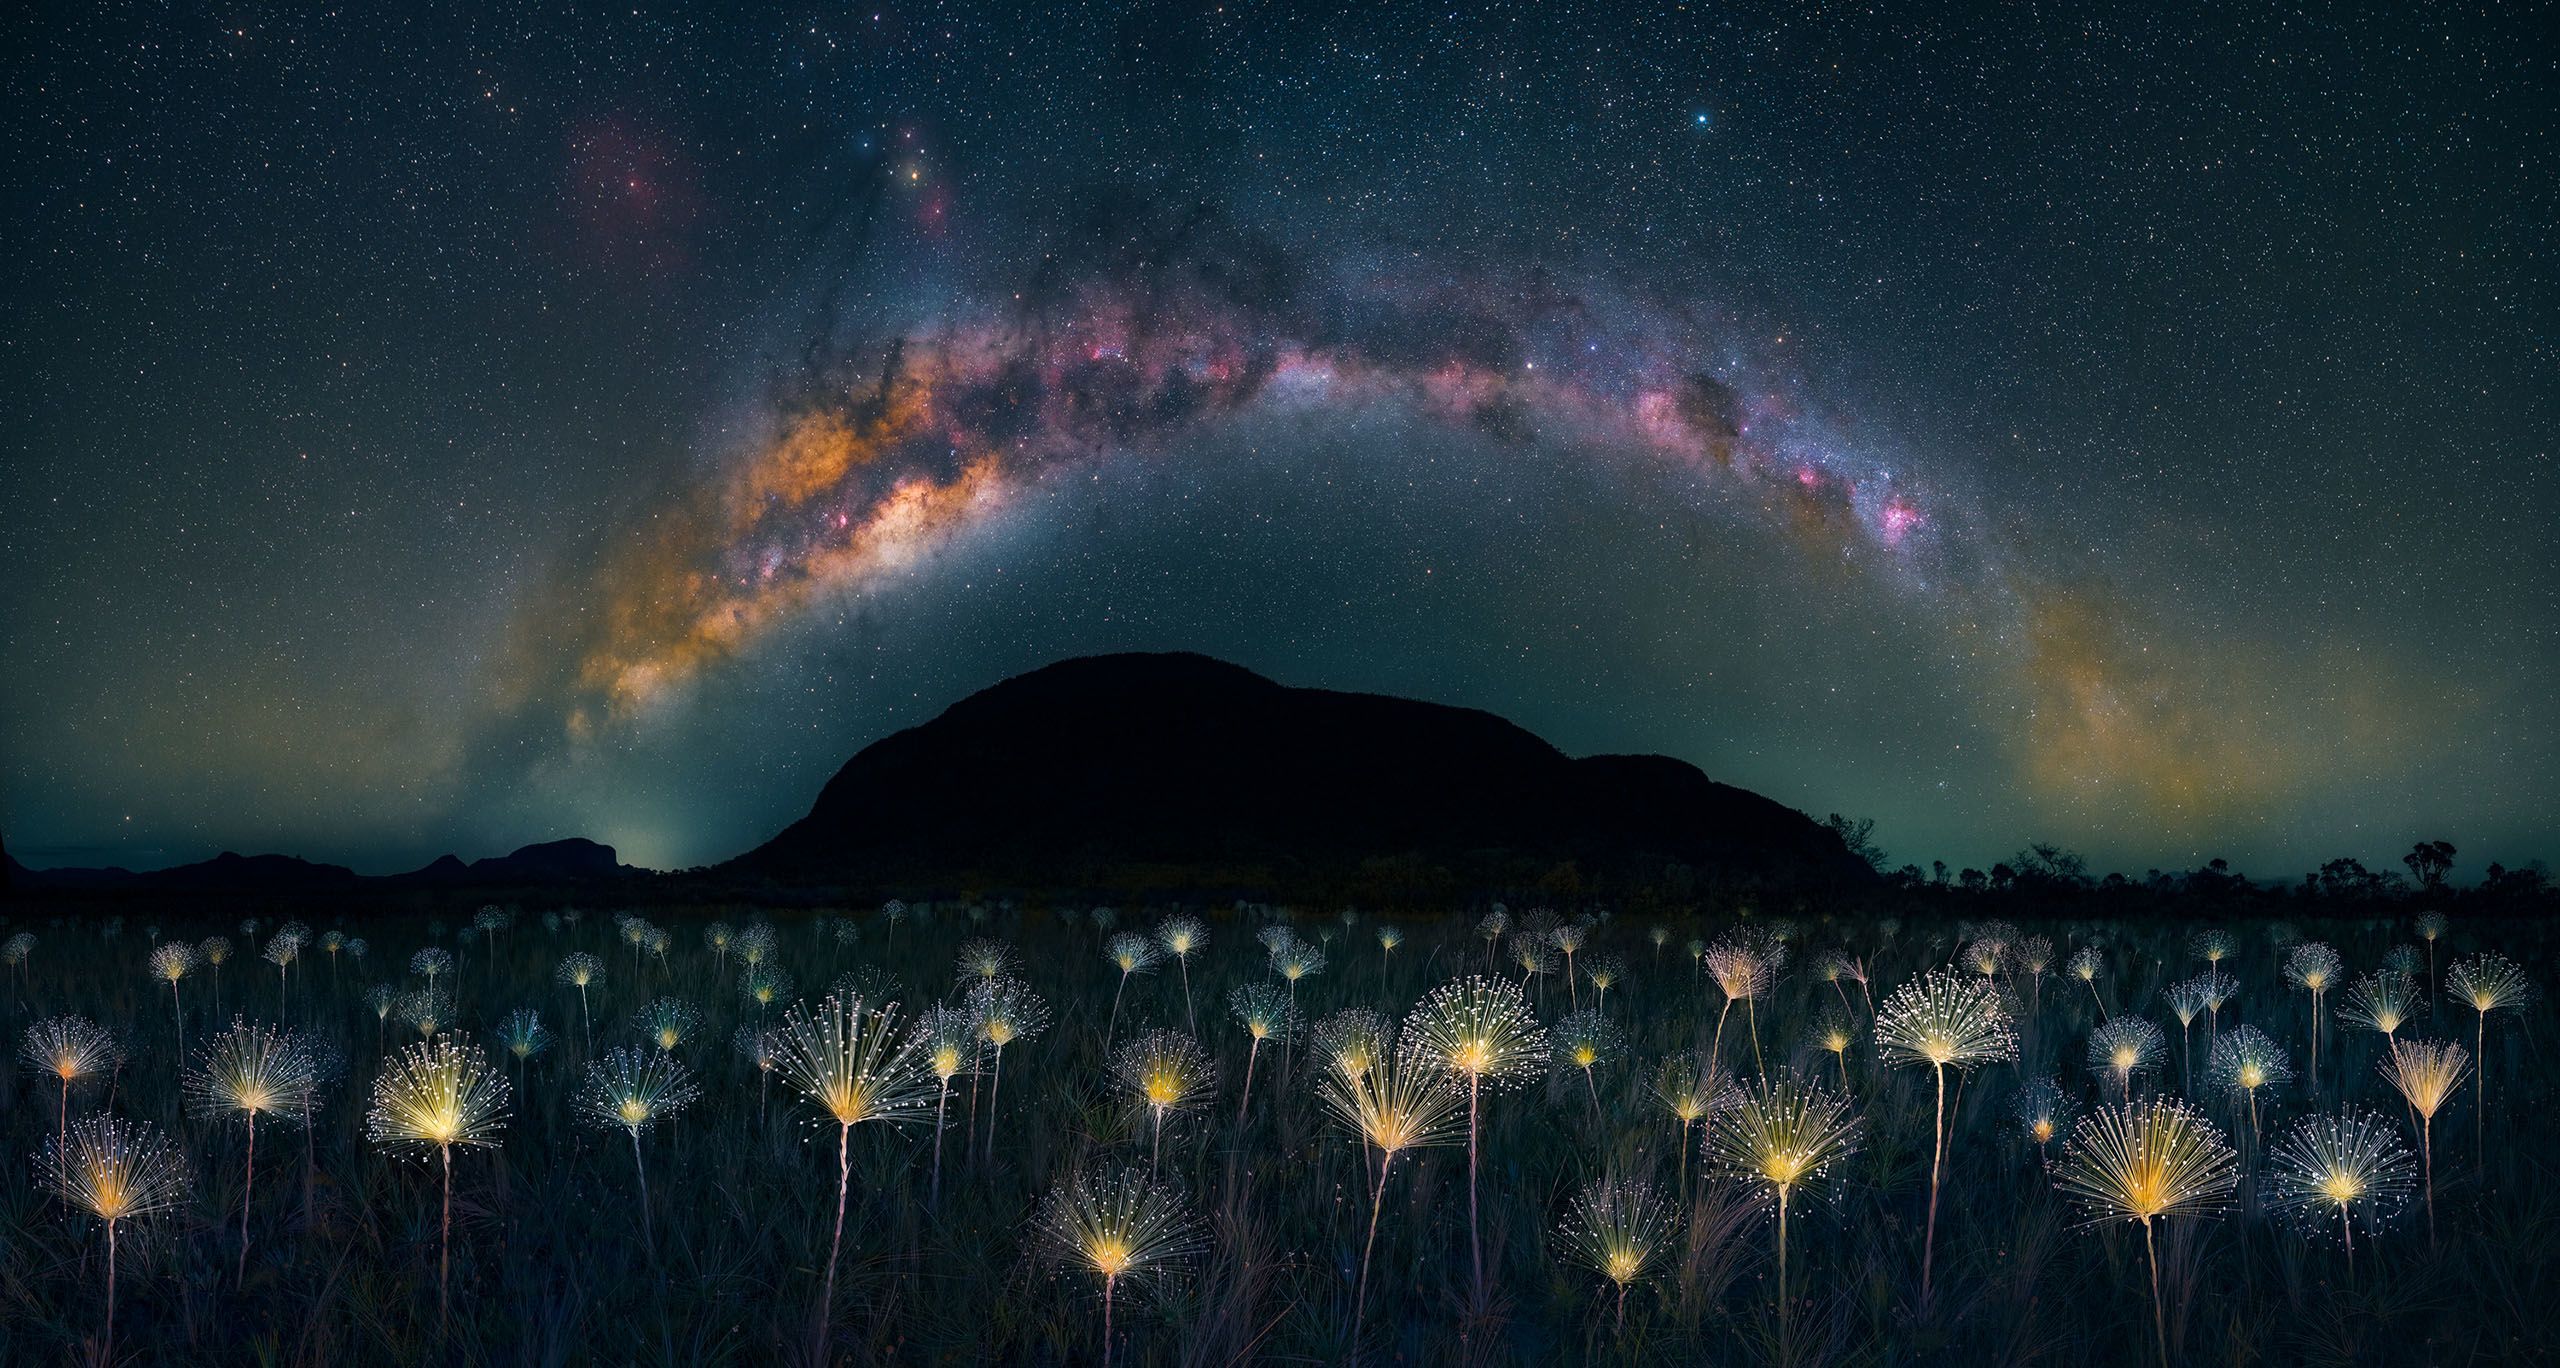 Wildflowers of the Paepalanthus species, in the highlands of Veadeiros, lit by a lantern and illuminated with the arch of the milky way above.